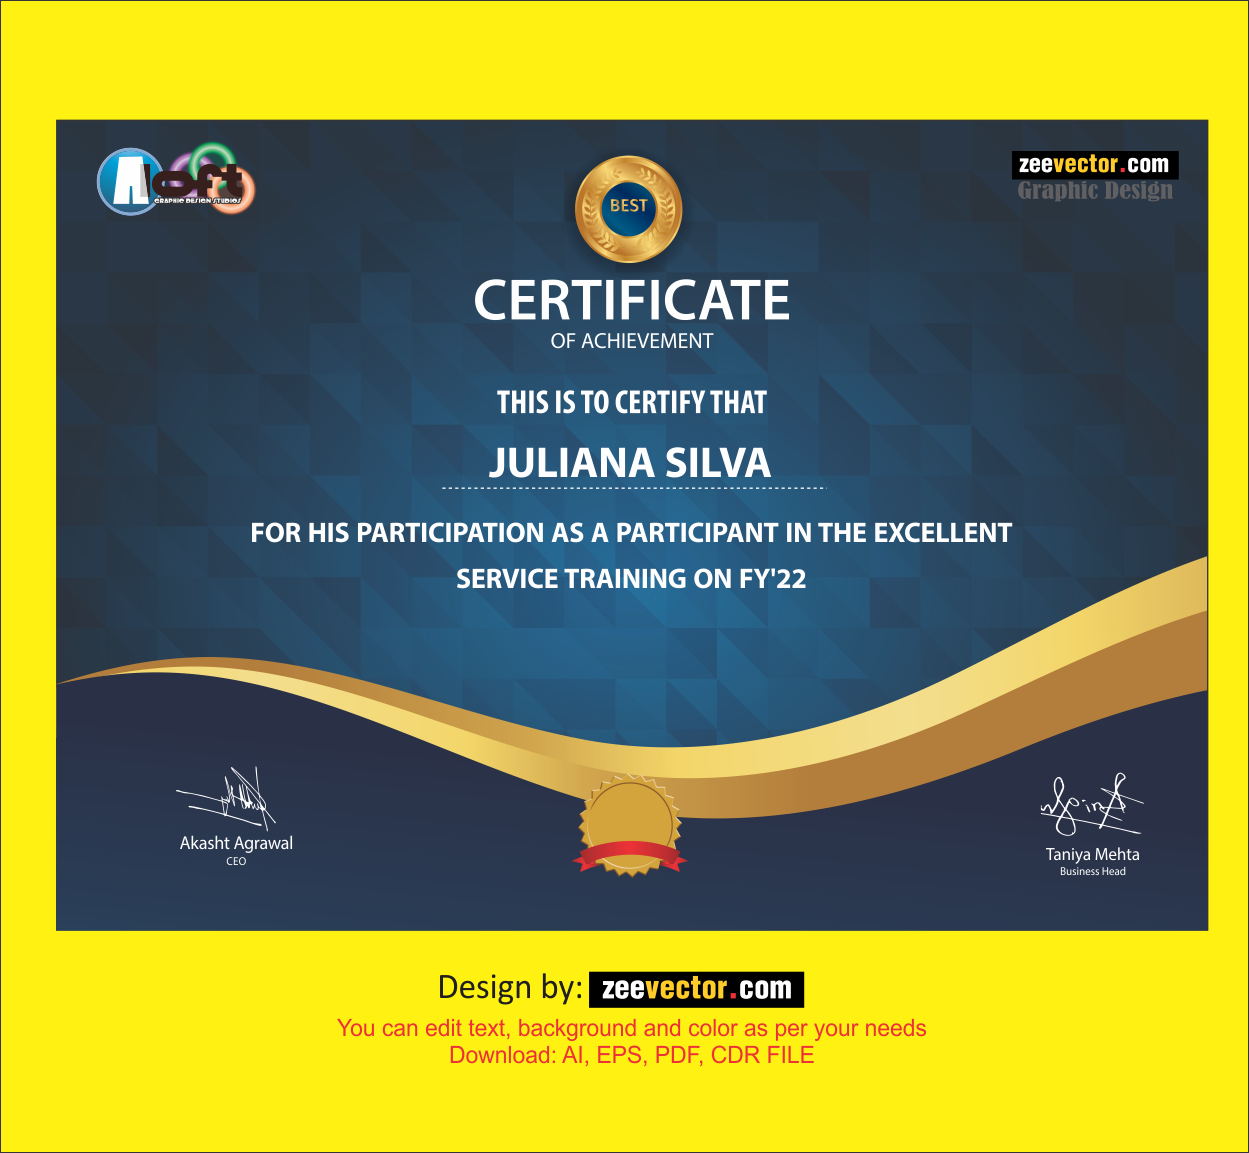 Certificate Vector Archives - FREE Vector Design - Cdr, Ai, EPS, PNG, SVG